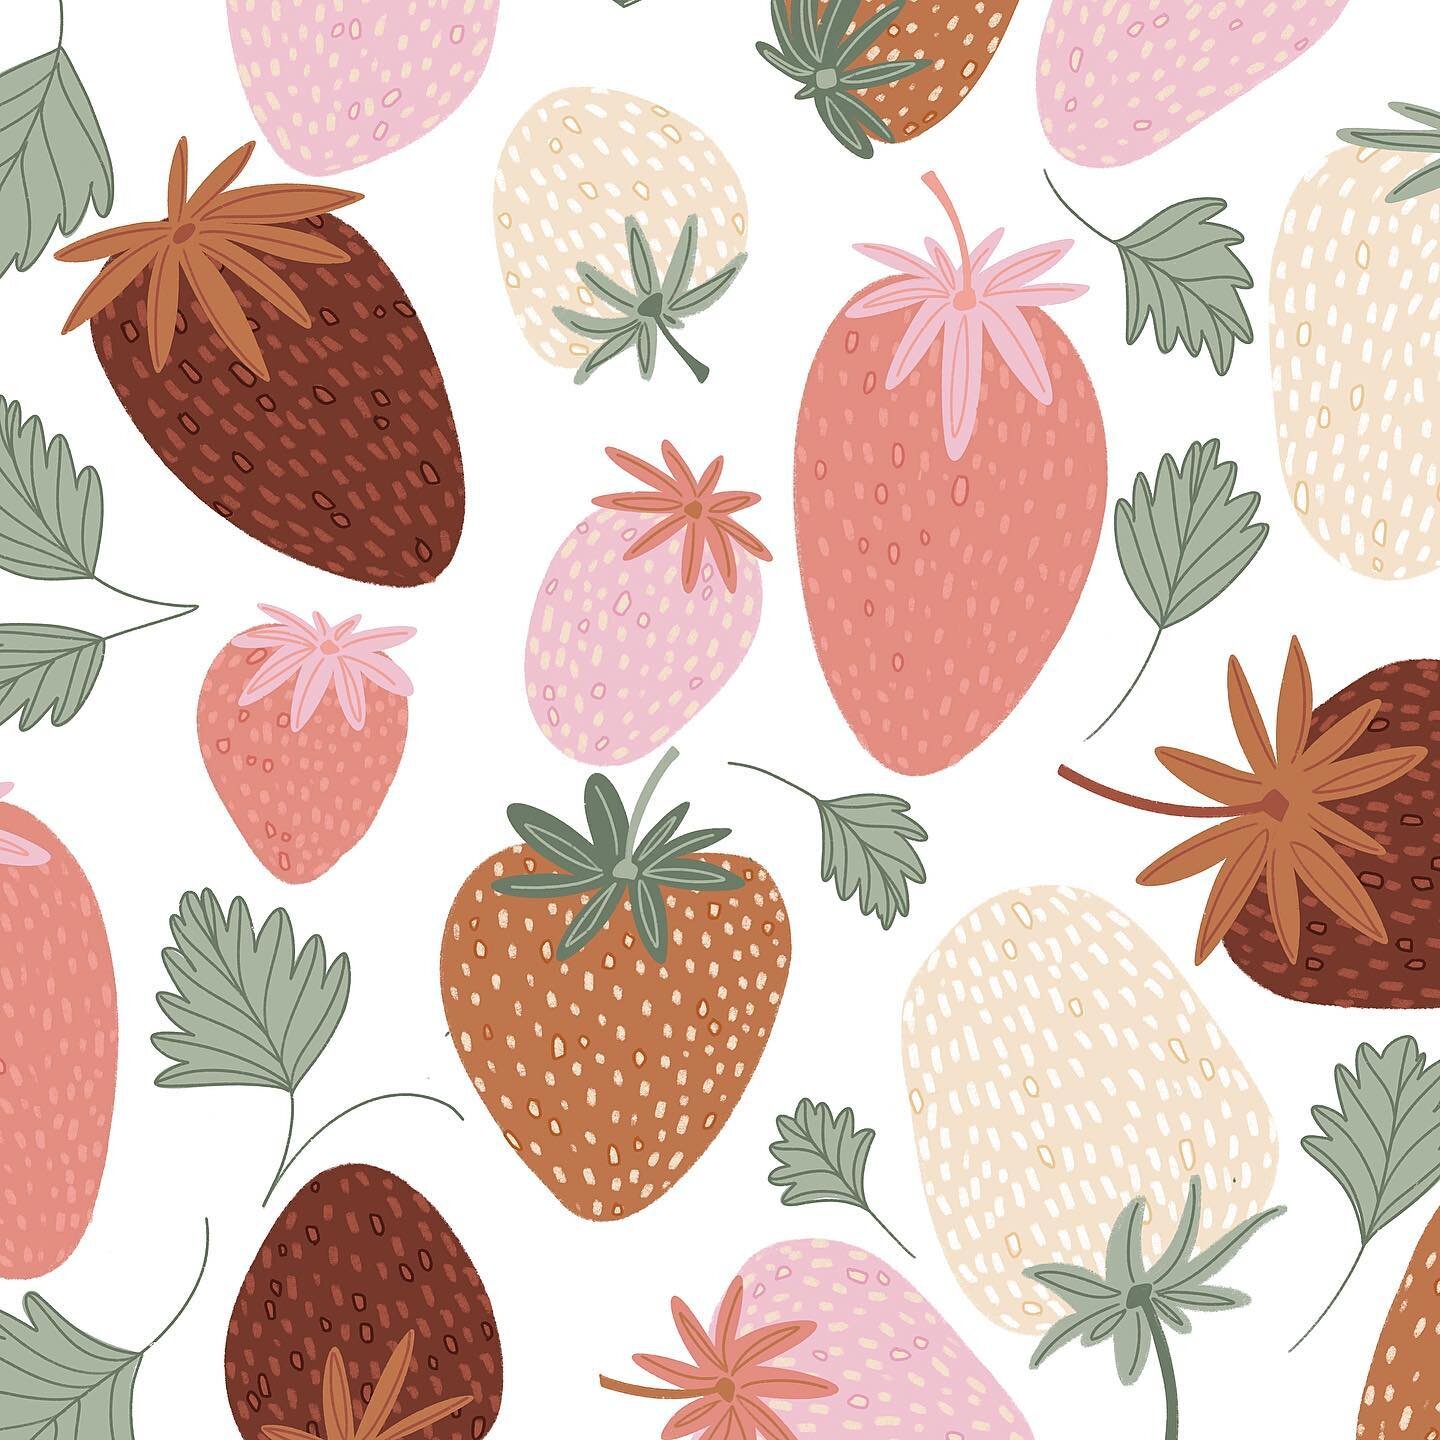 Fun little close up of my sketch from this past weekend. 🍓

One of my favorite things about summer is fresh strawberries! Growing up we had a large patch of strawberries growing underneath the shade of several large aspen trees. We would pick them e